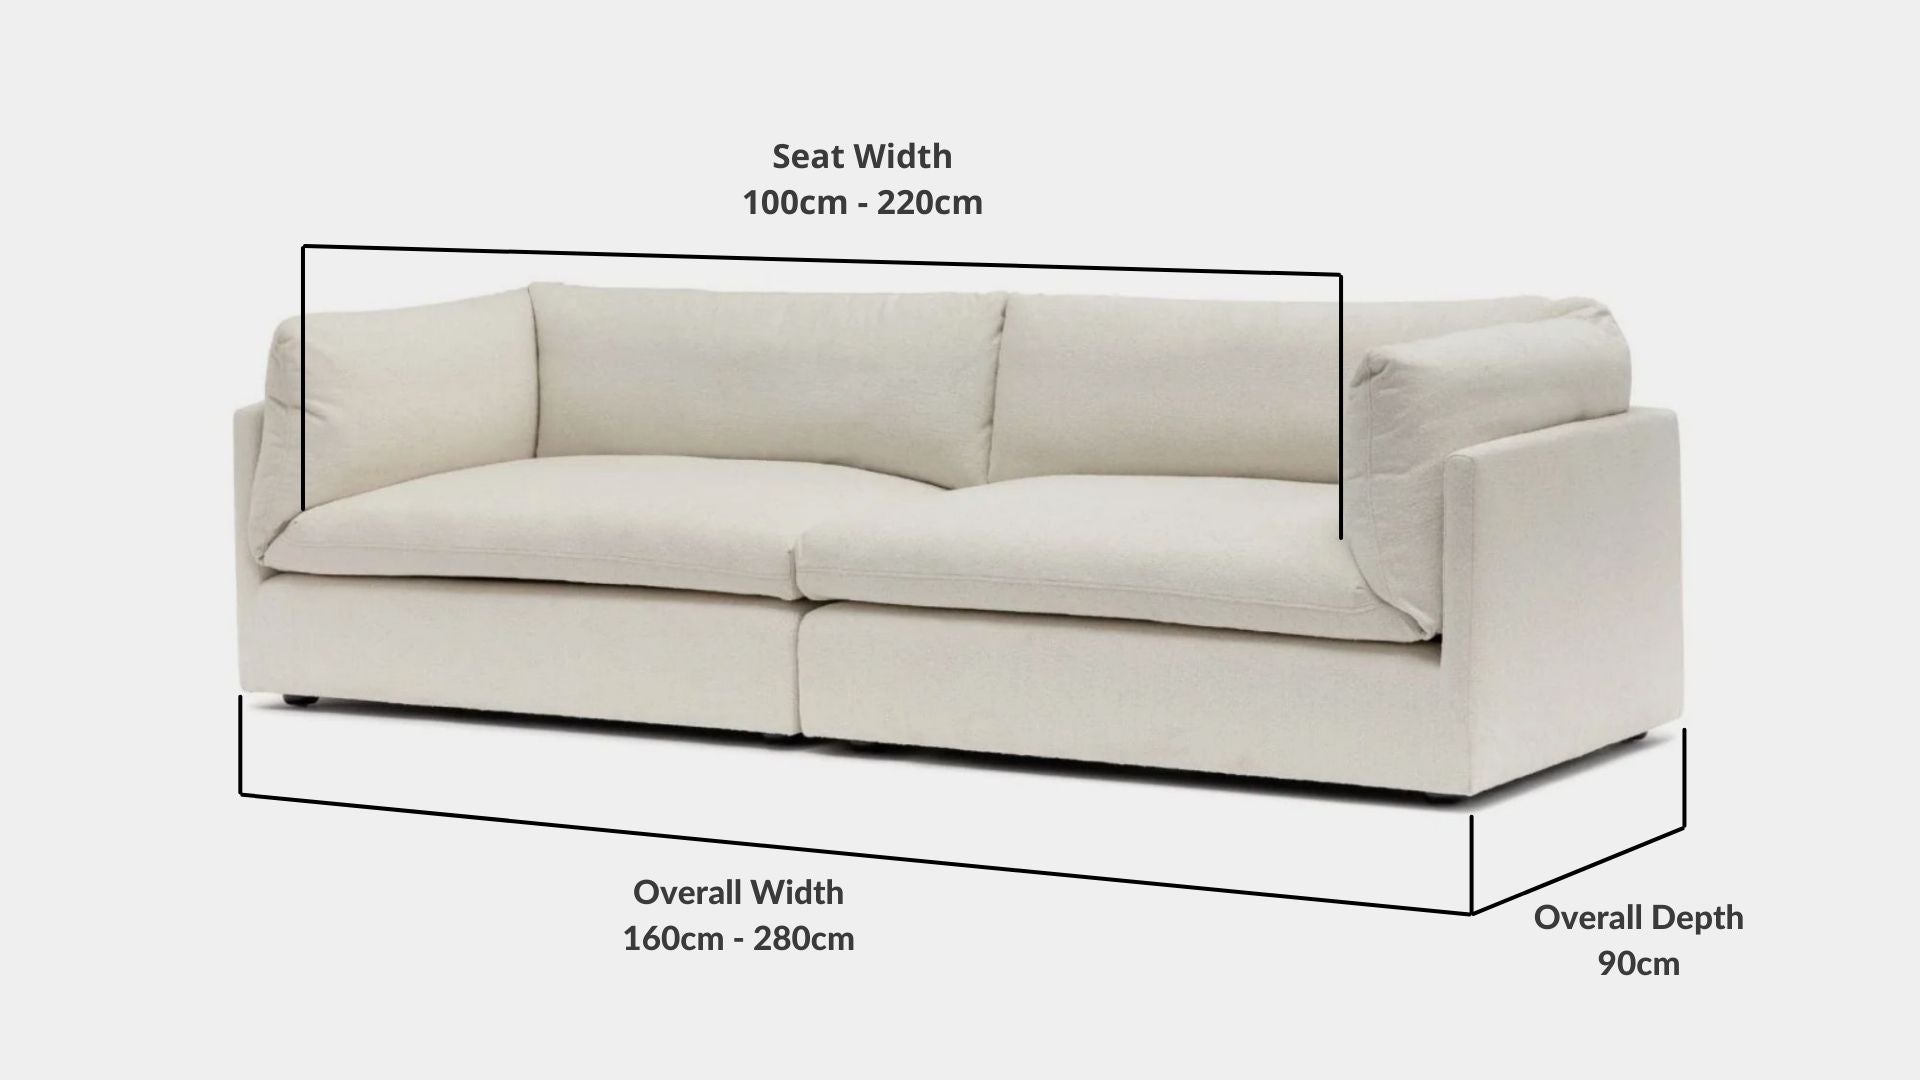 Details the key dimensions in terms of overall width, overall depth and seat width for Clara Fabric Sofa